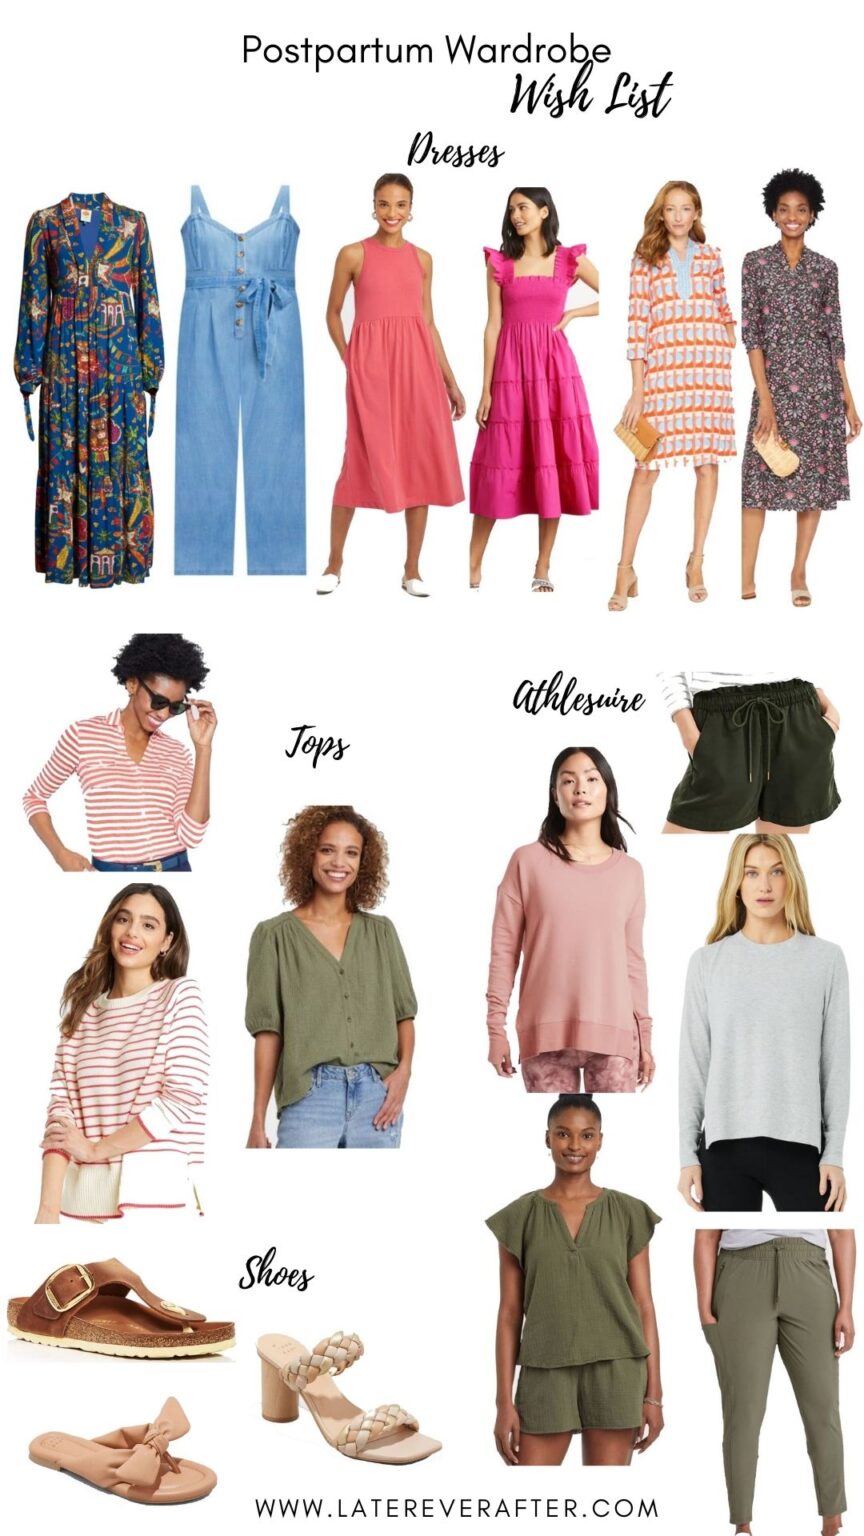 Postpartum Outfits Wish List - Later Ever After, BlogLater Ever After ...